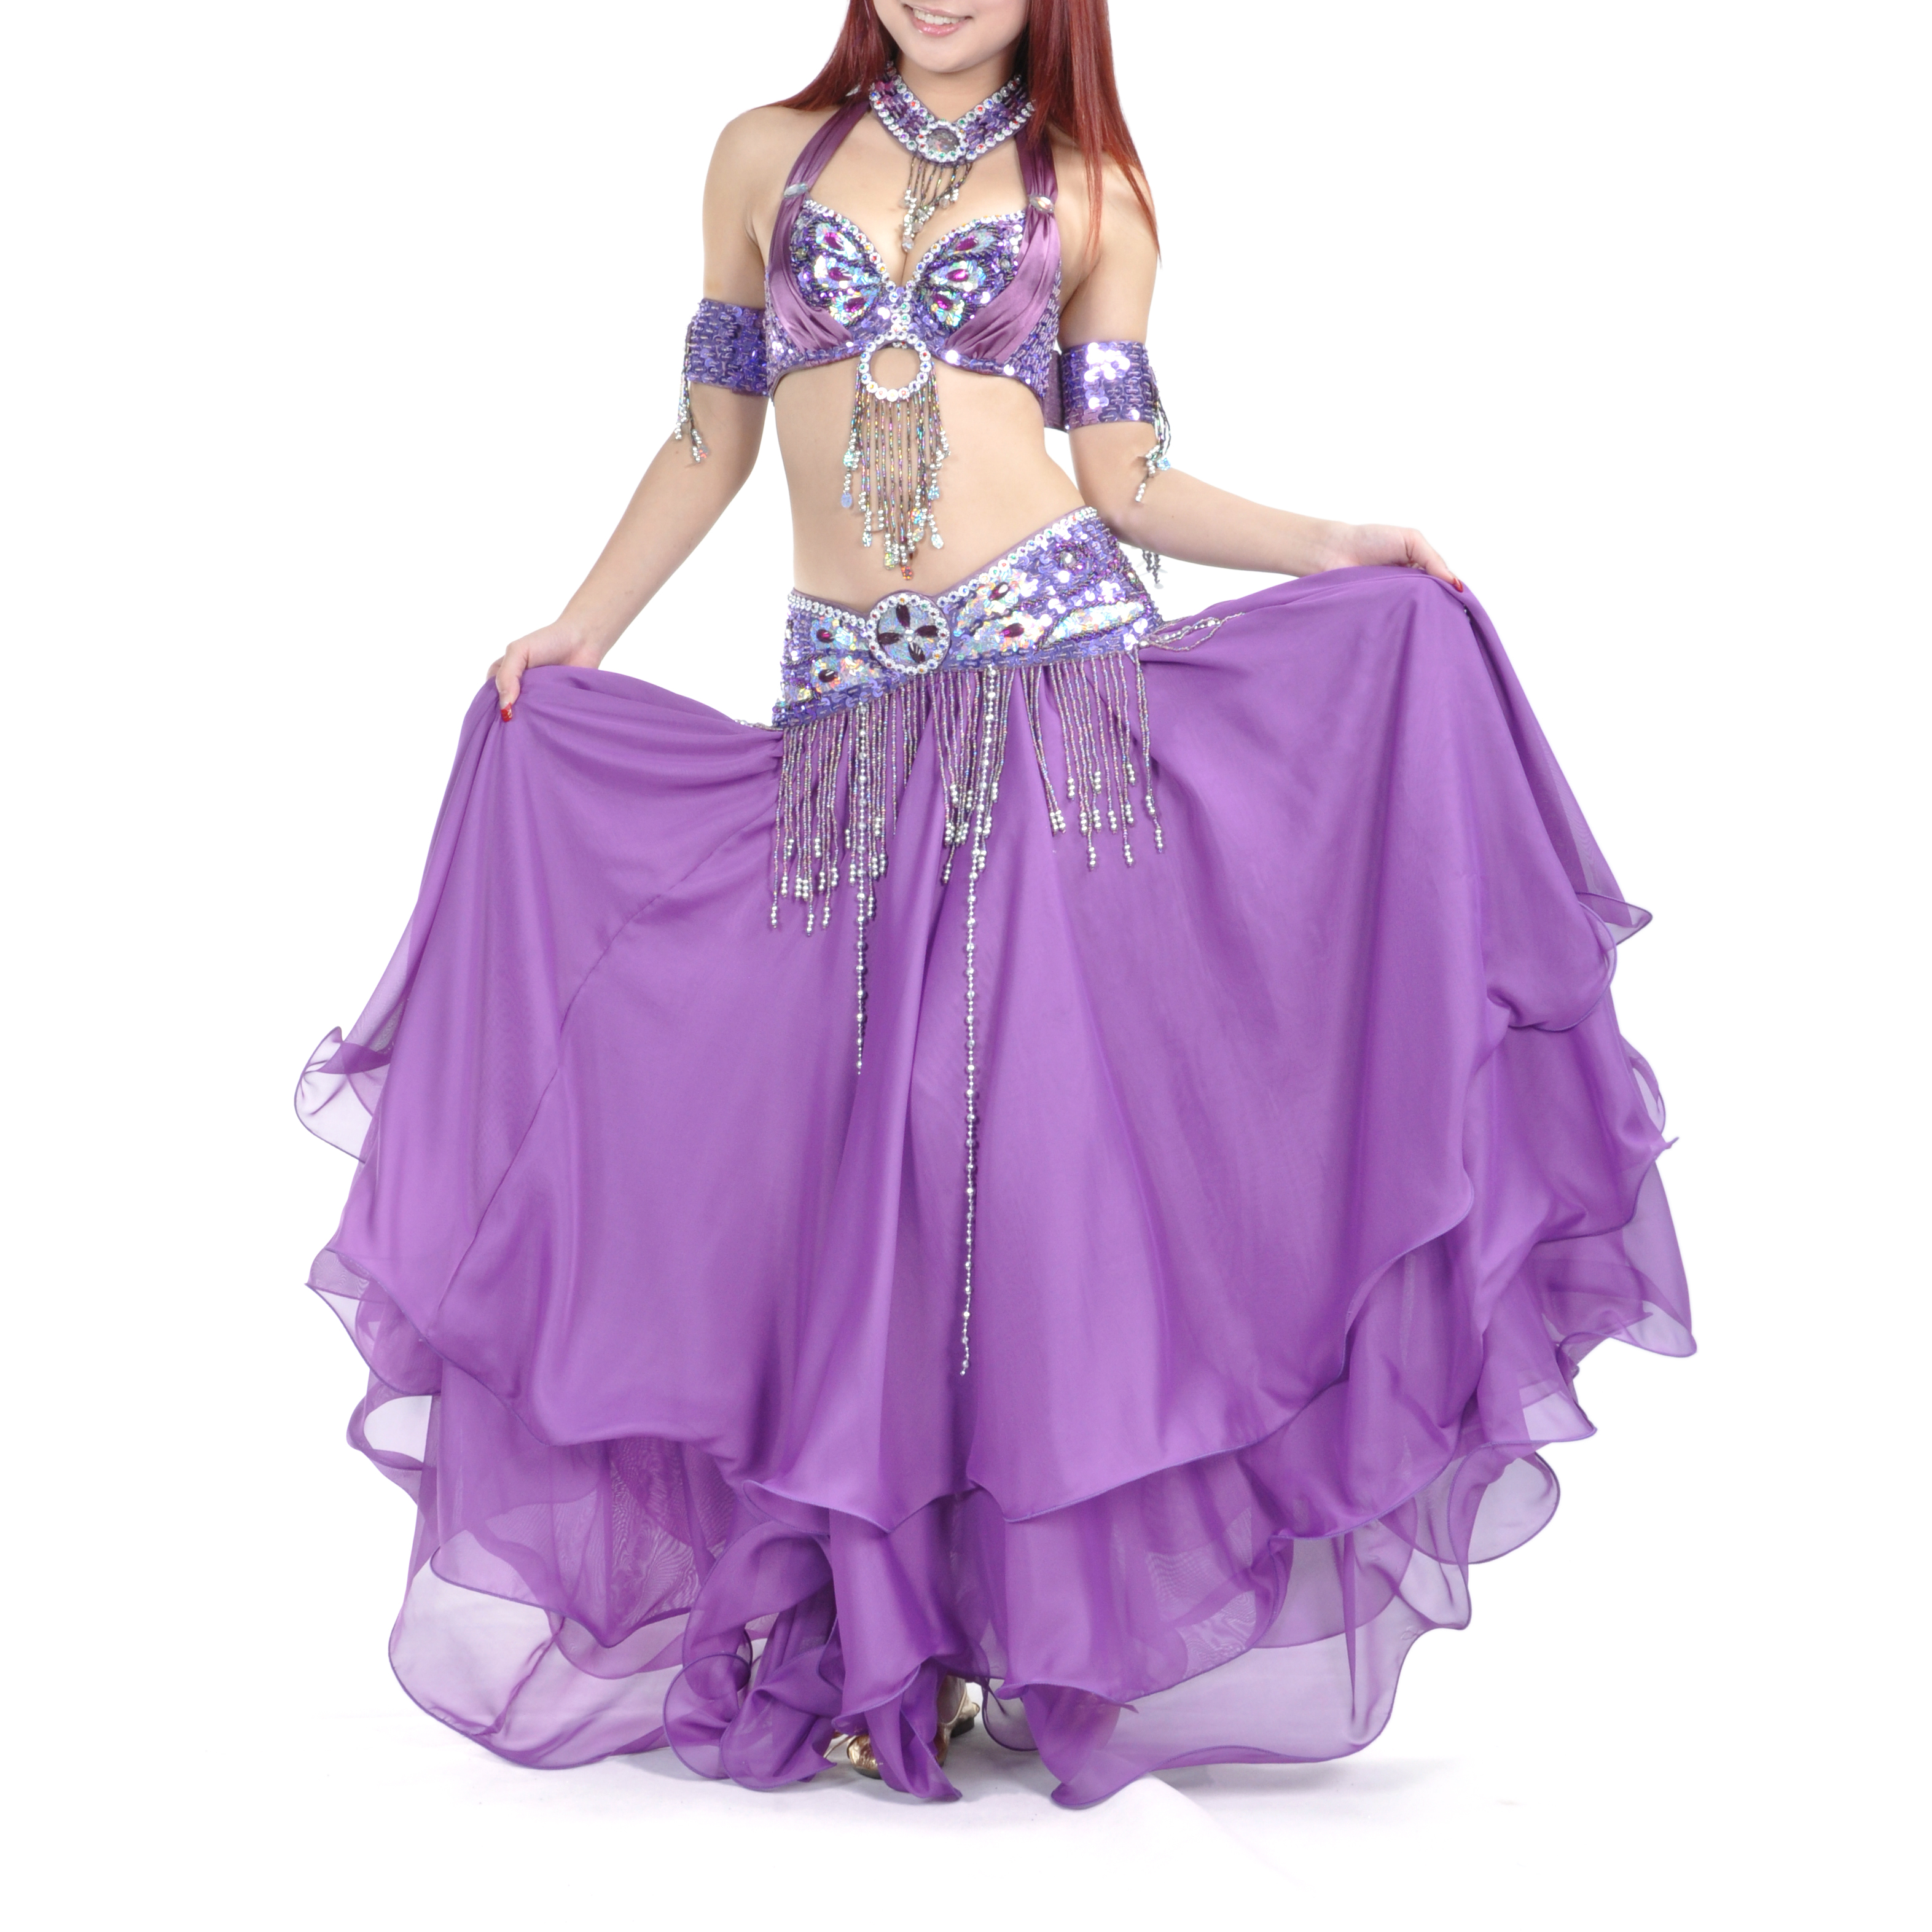 Bellylady 5 Pieces Professional Gypsy Trial Belly Dancing Costume Purple Halter